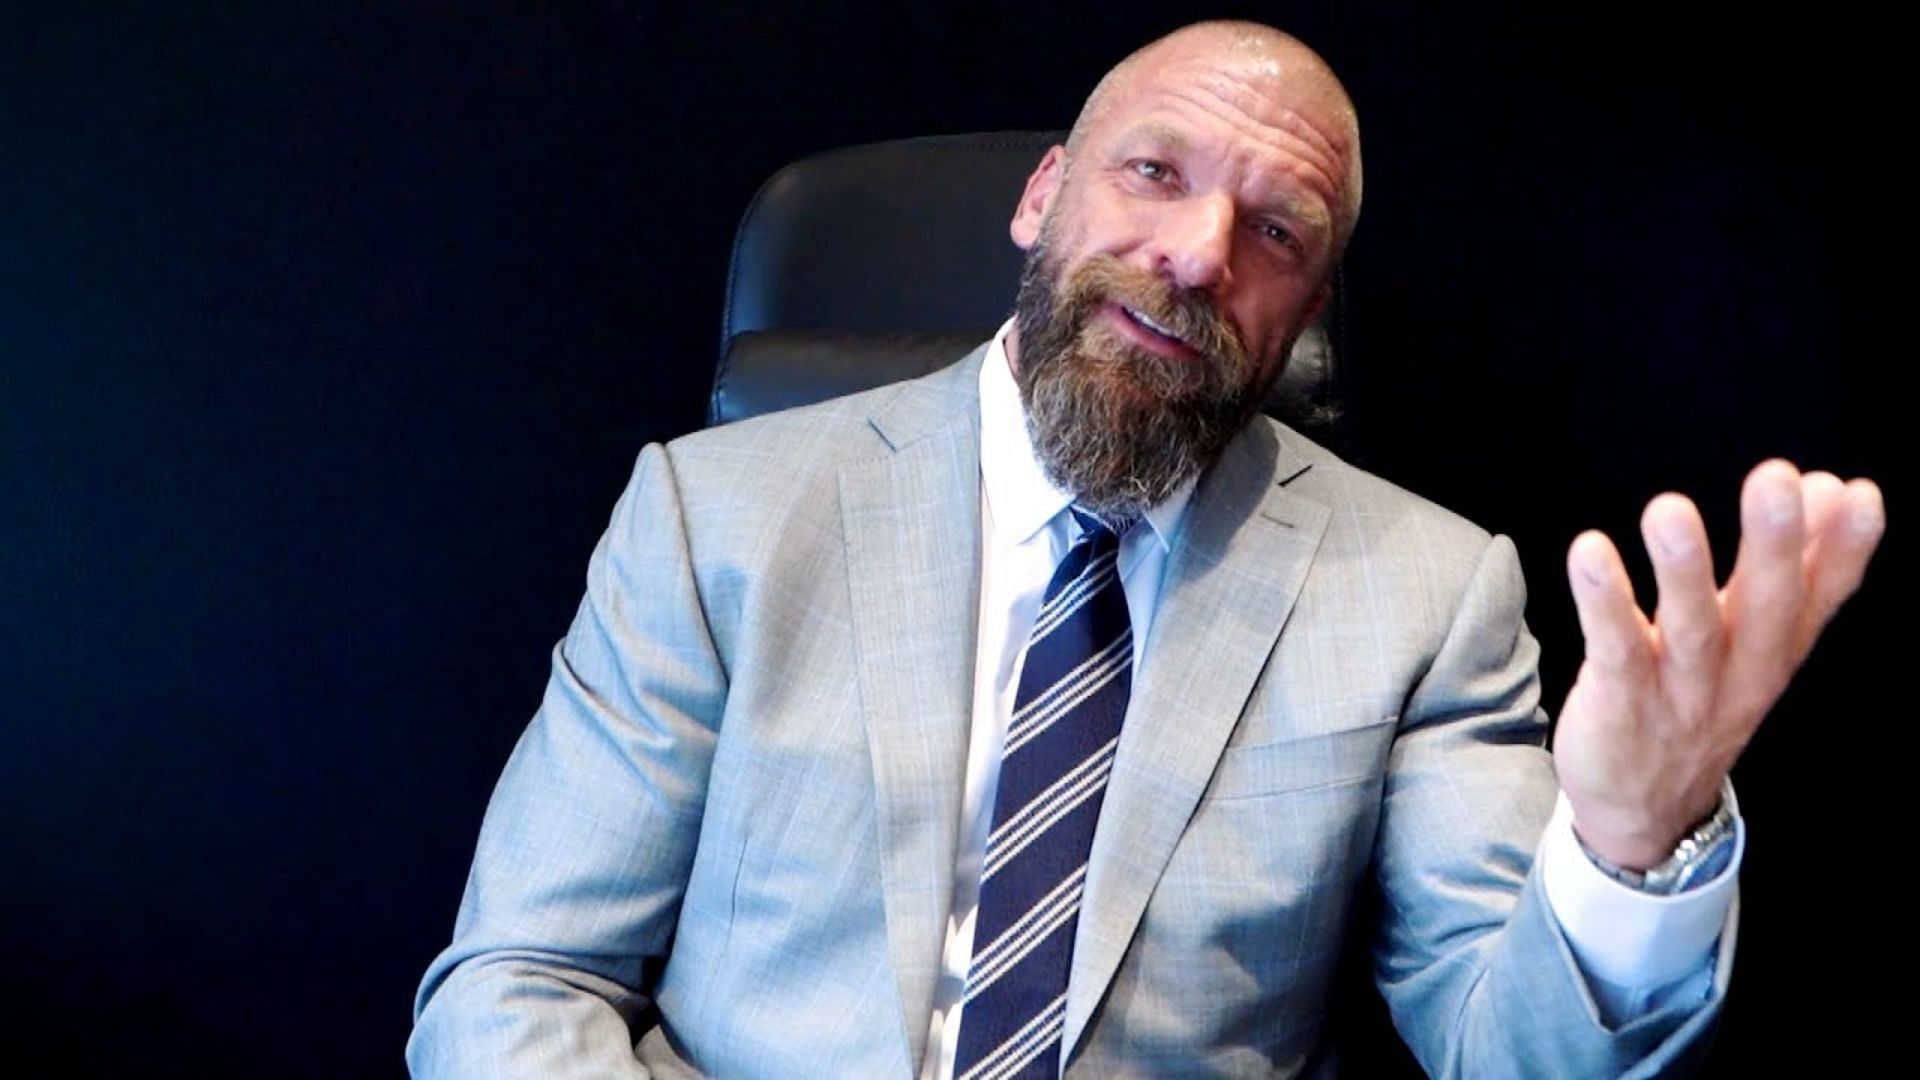 Triple H is a multi-time world champion